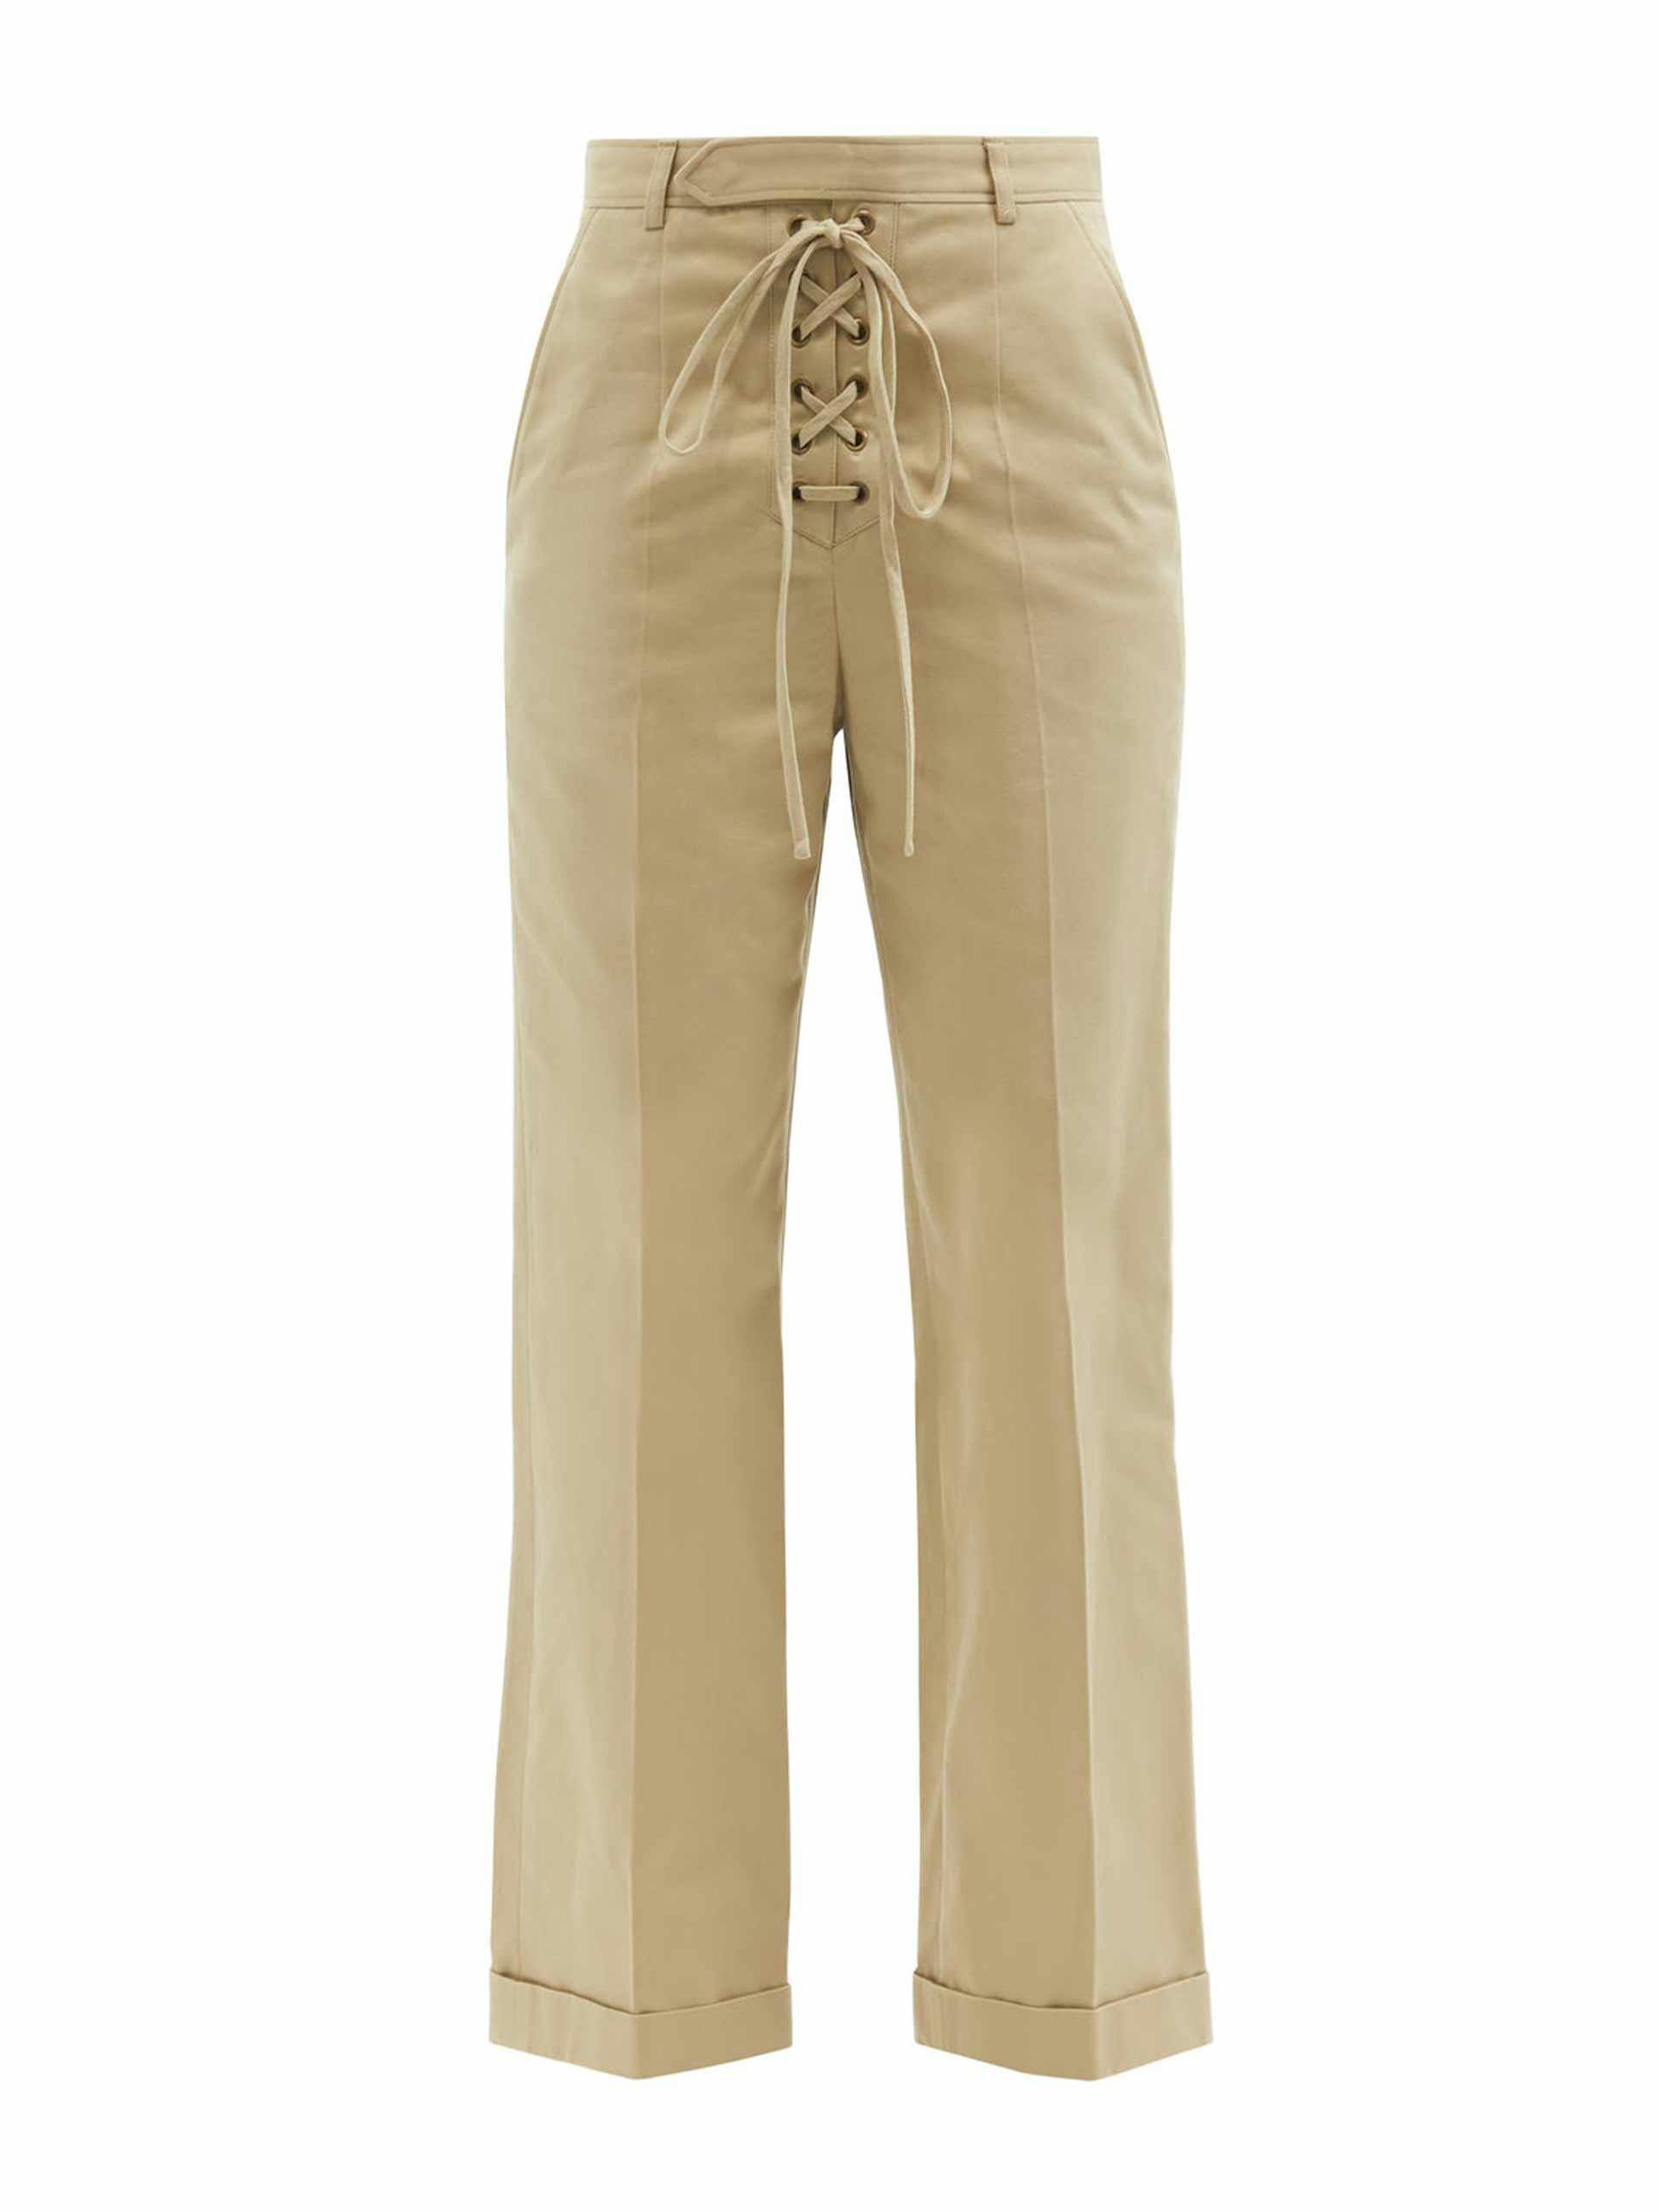 Beige lace-up trousers